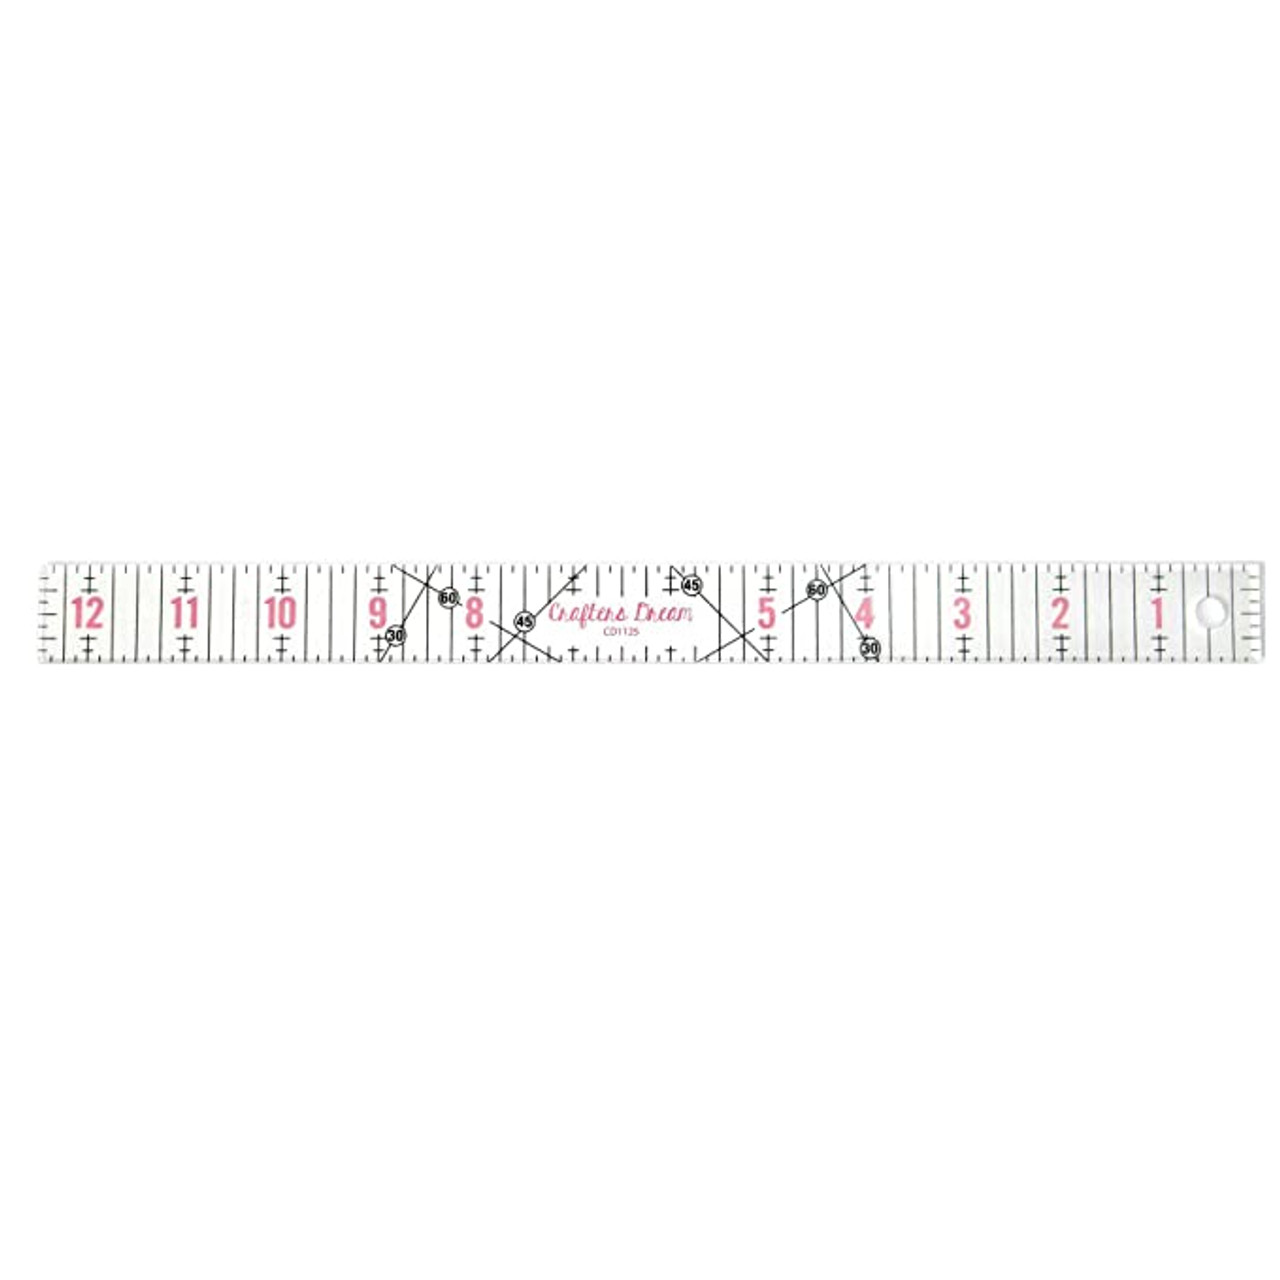 12.5 x 12.5 Inch Square, Shop our Square Quilting Ruler, Cutting Tools